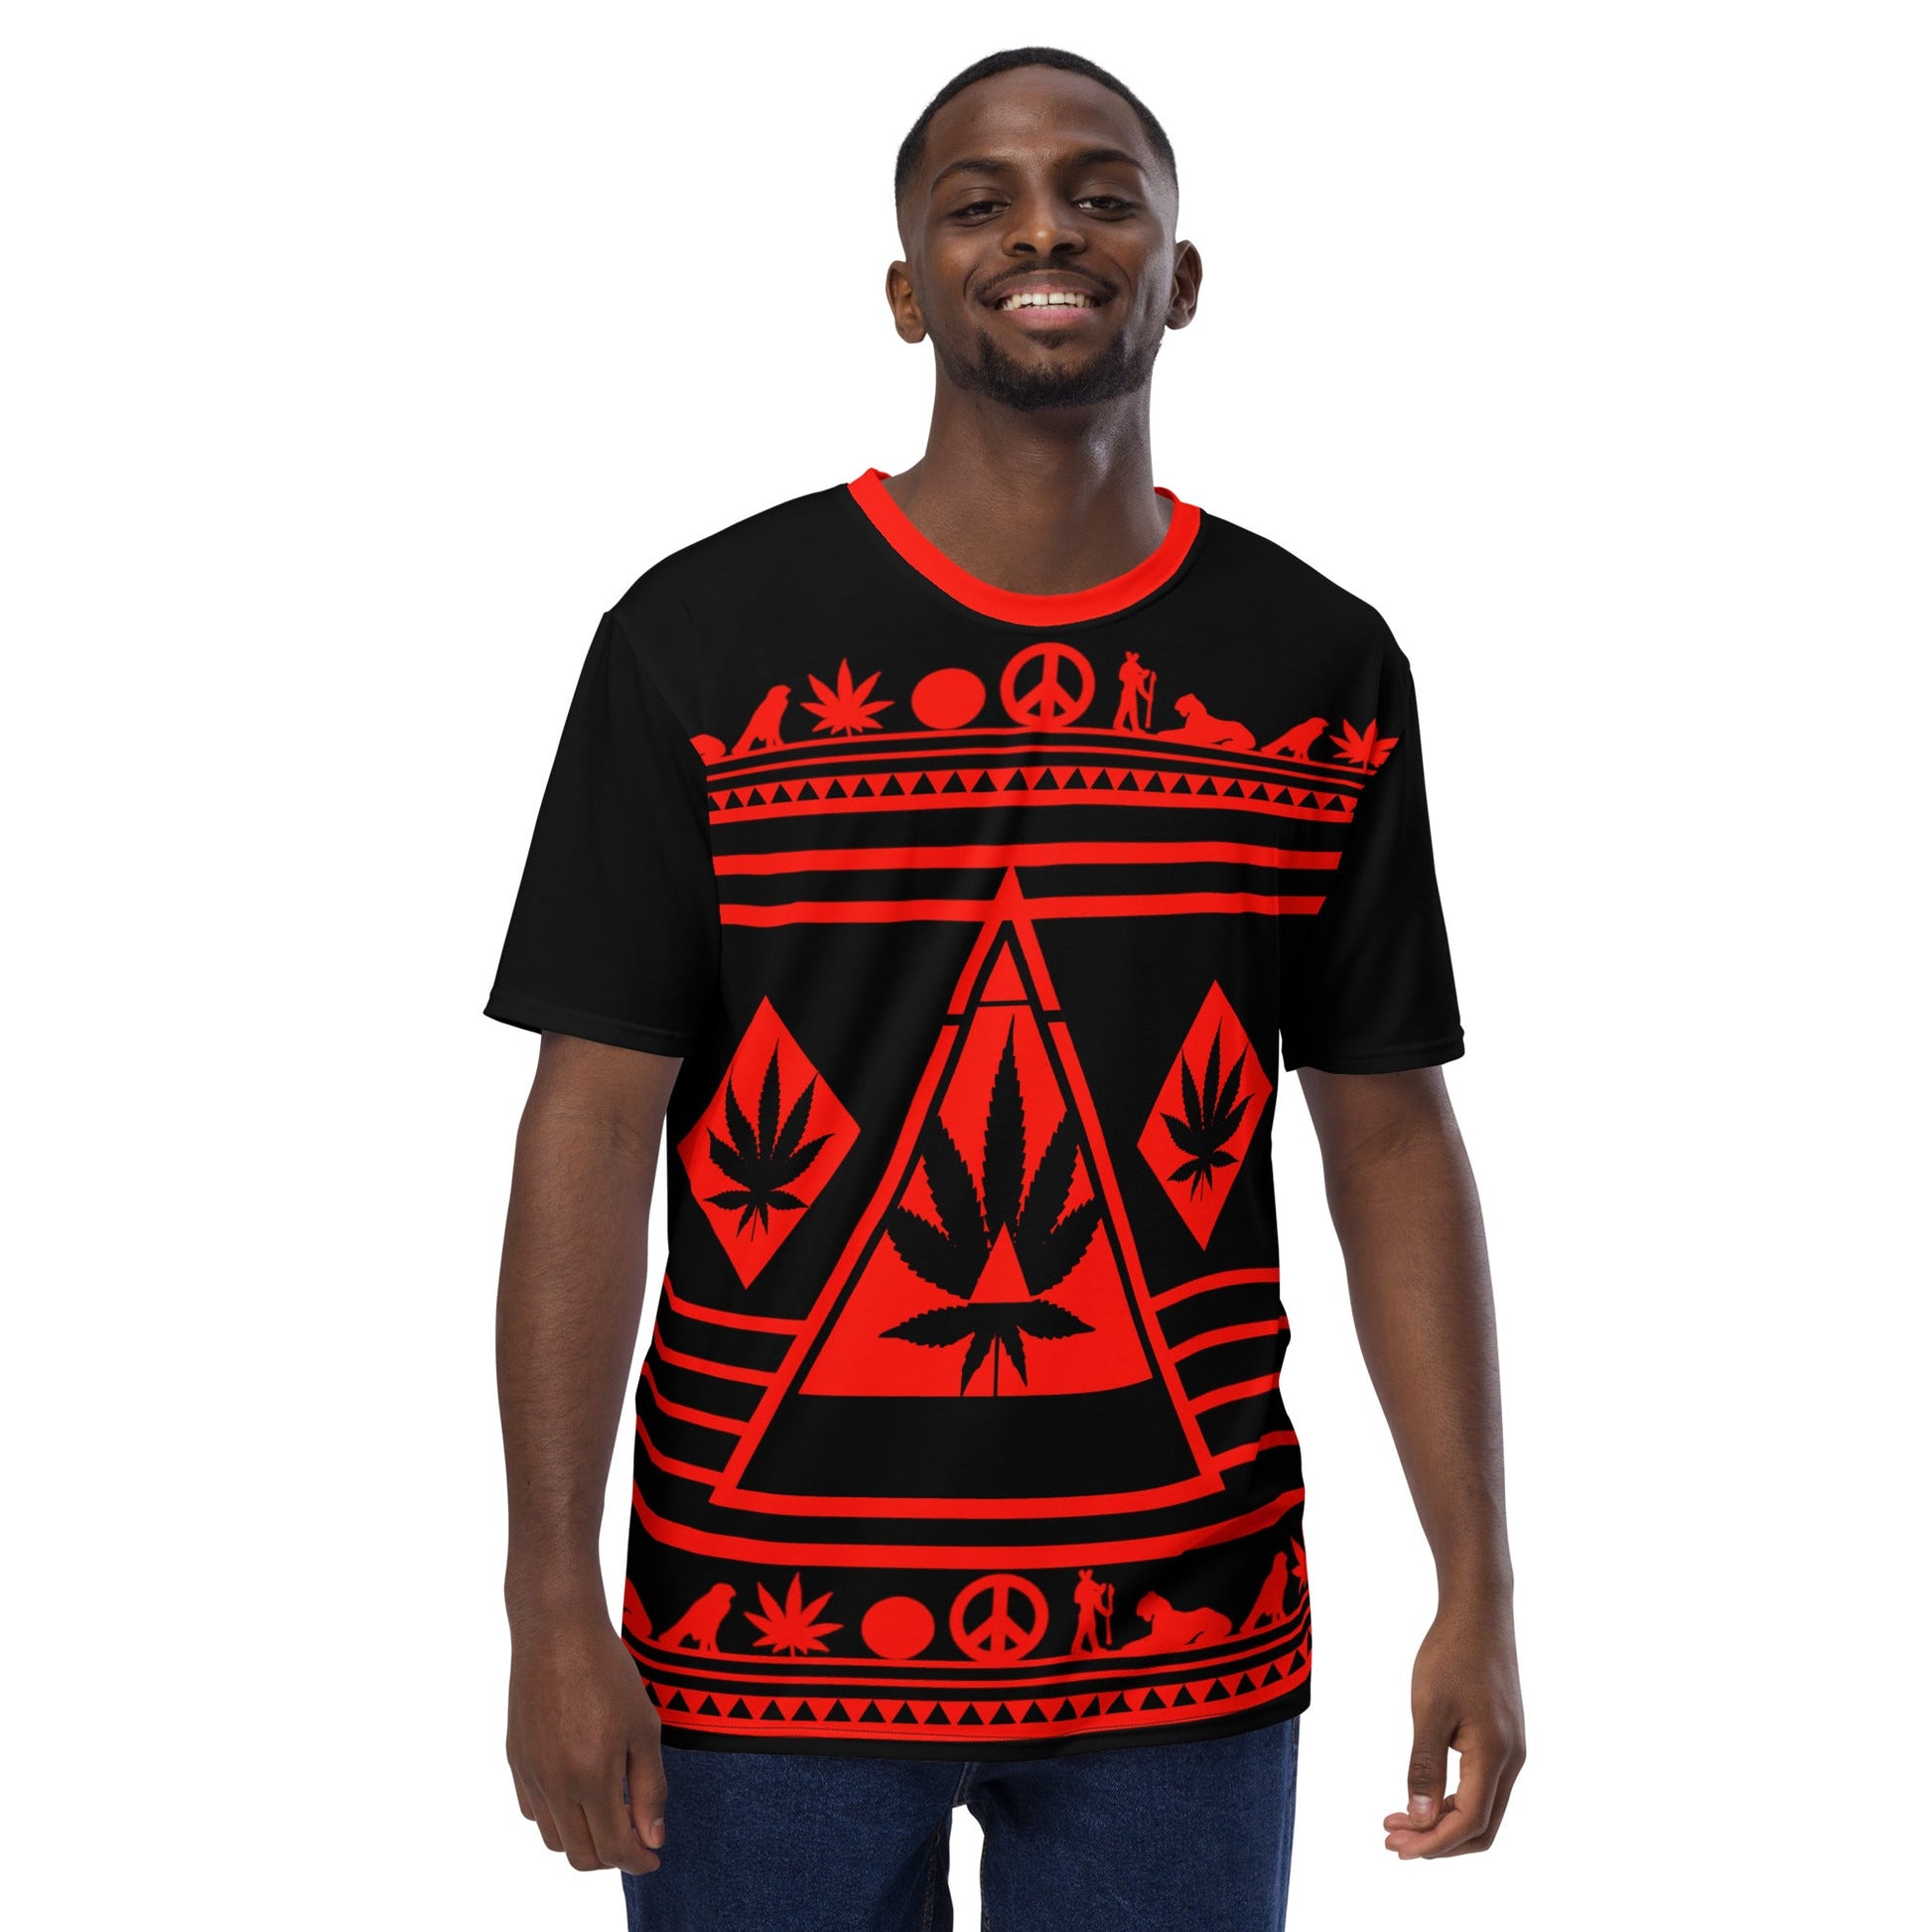 black and red weed leaf shirt